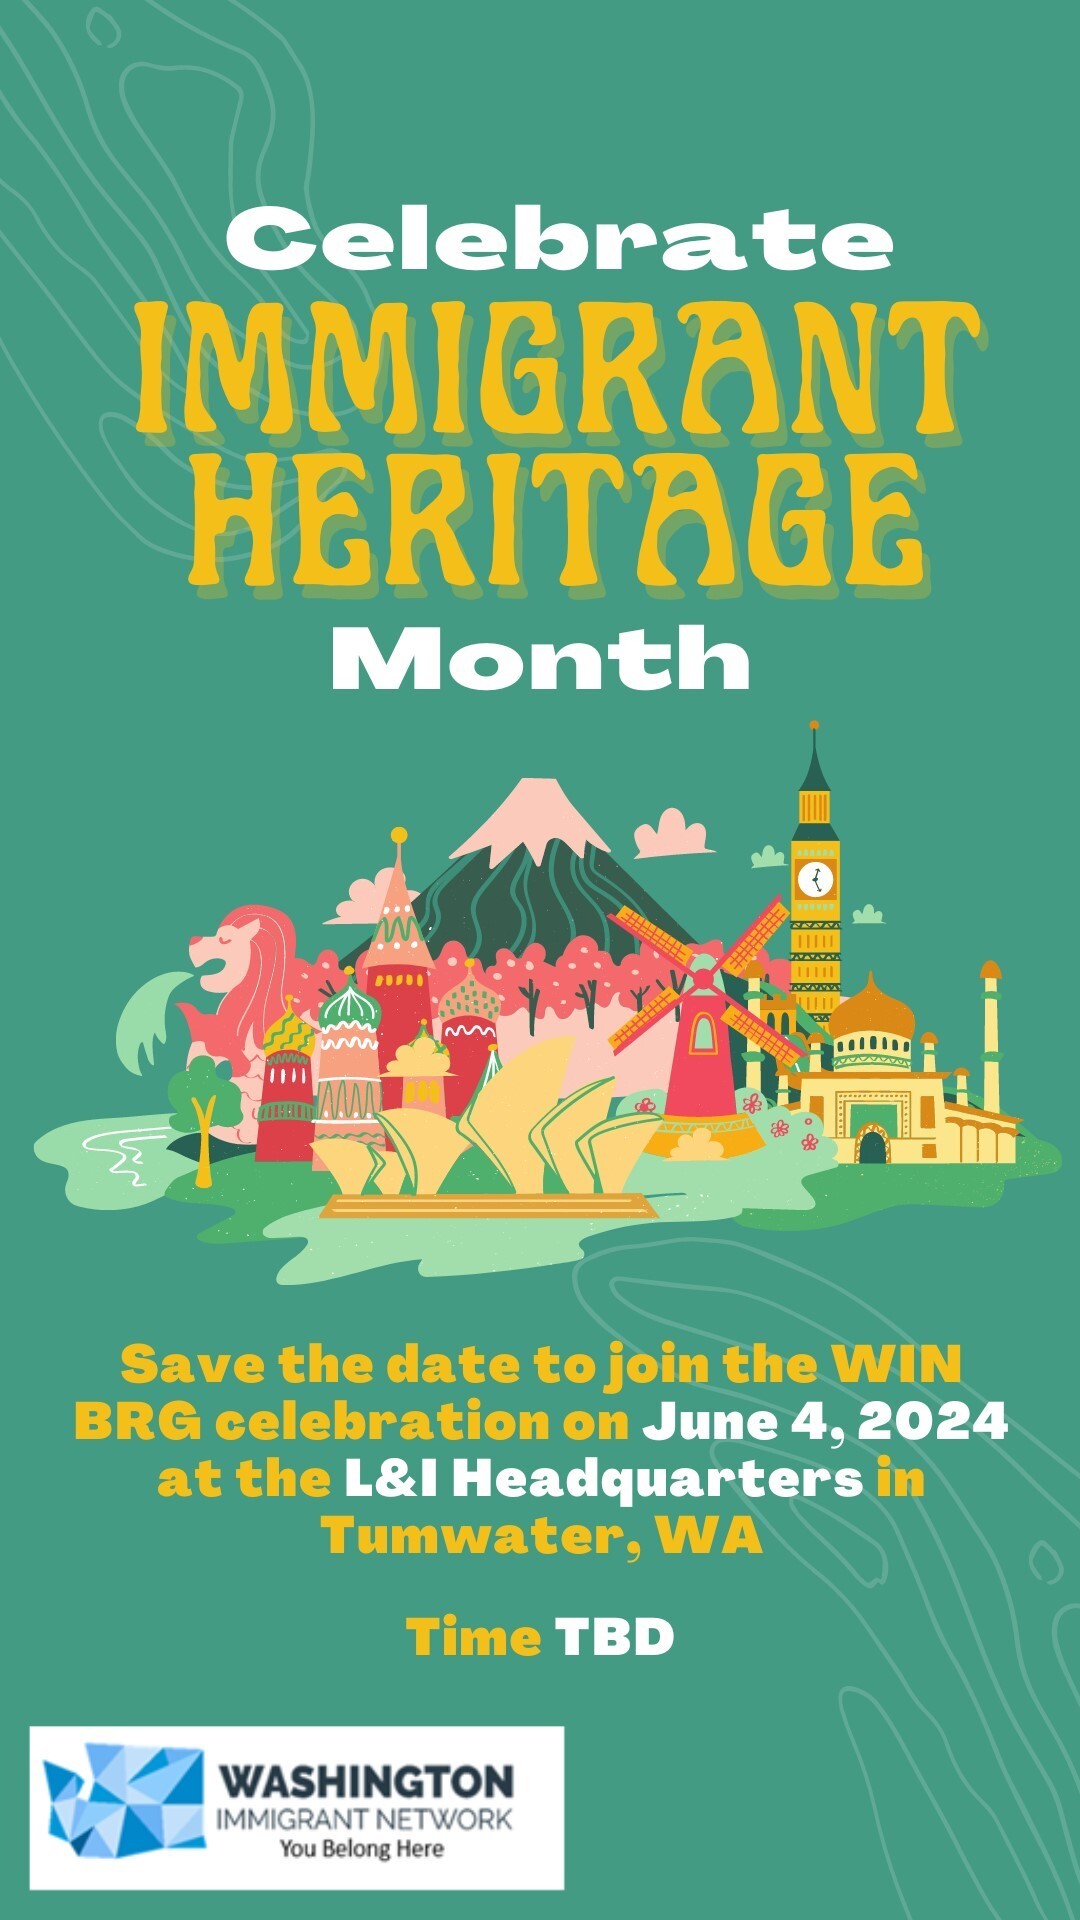 Immigrant Heritage Month Celebration "Save the Date" Poster